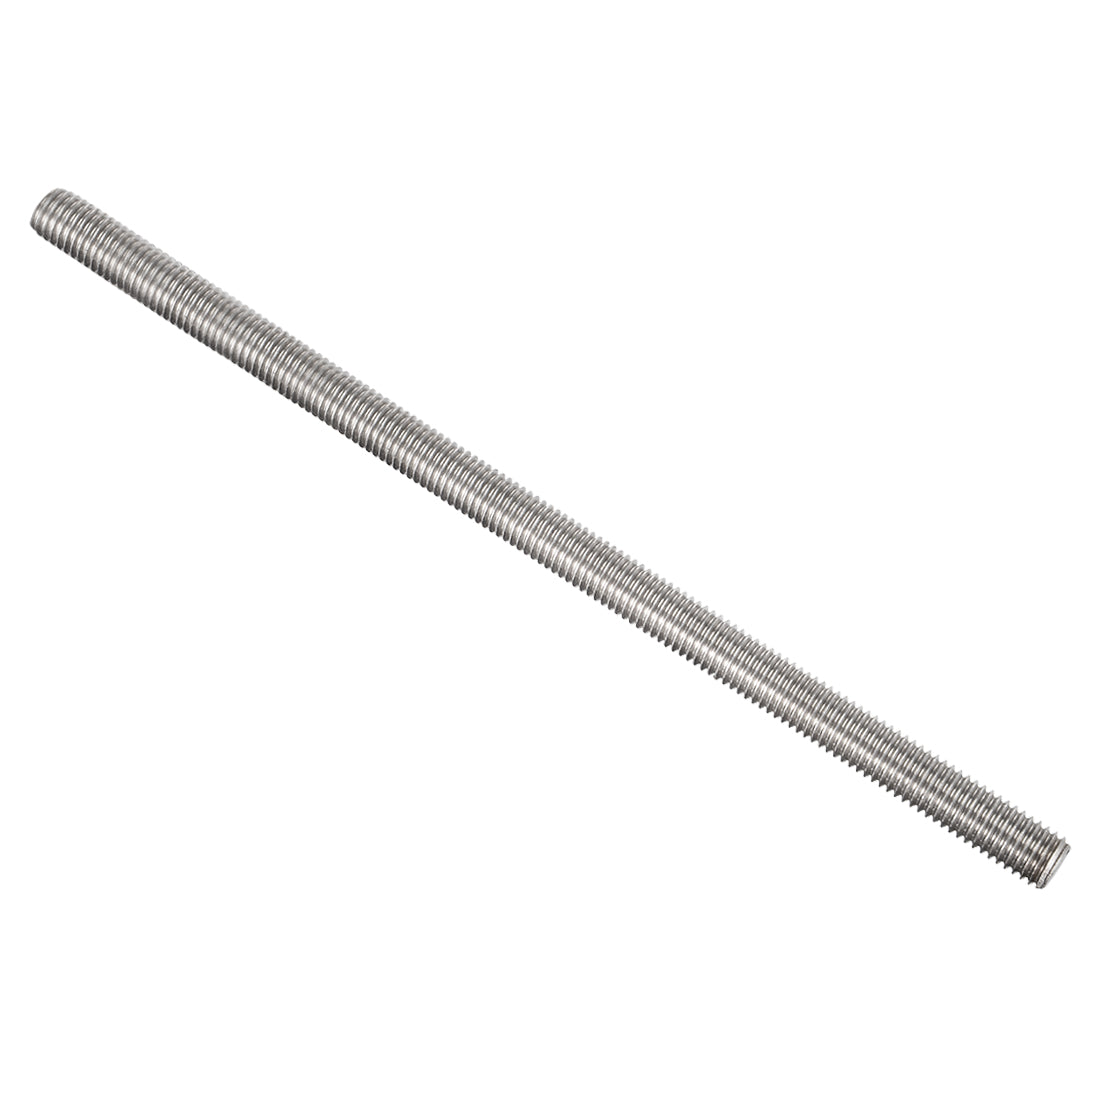 uxcell Uxcell M12 x 500mm Fully Threaded Rod 304 Stainless Steel Right Hand Threads